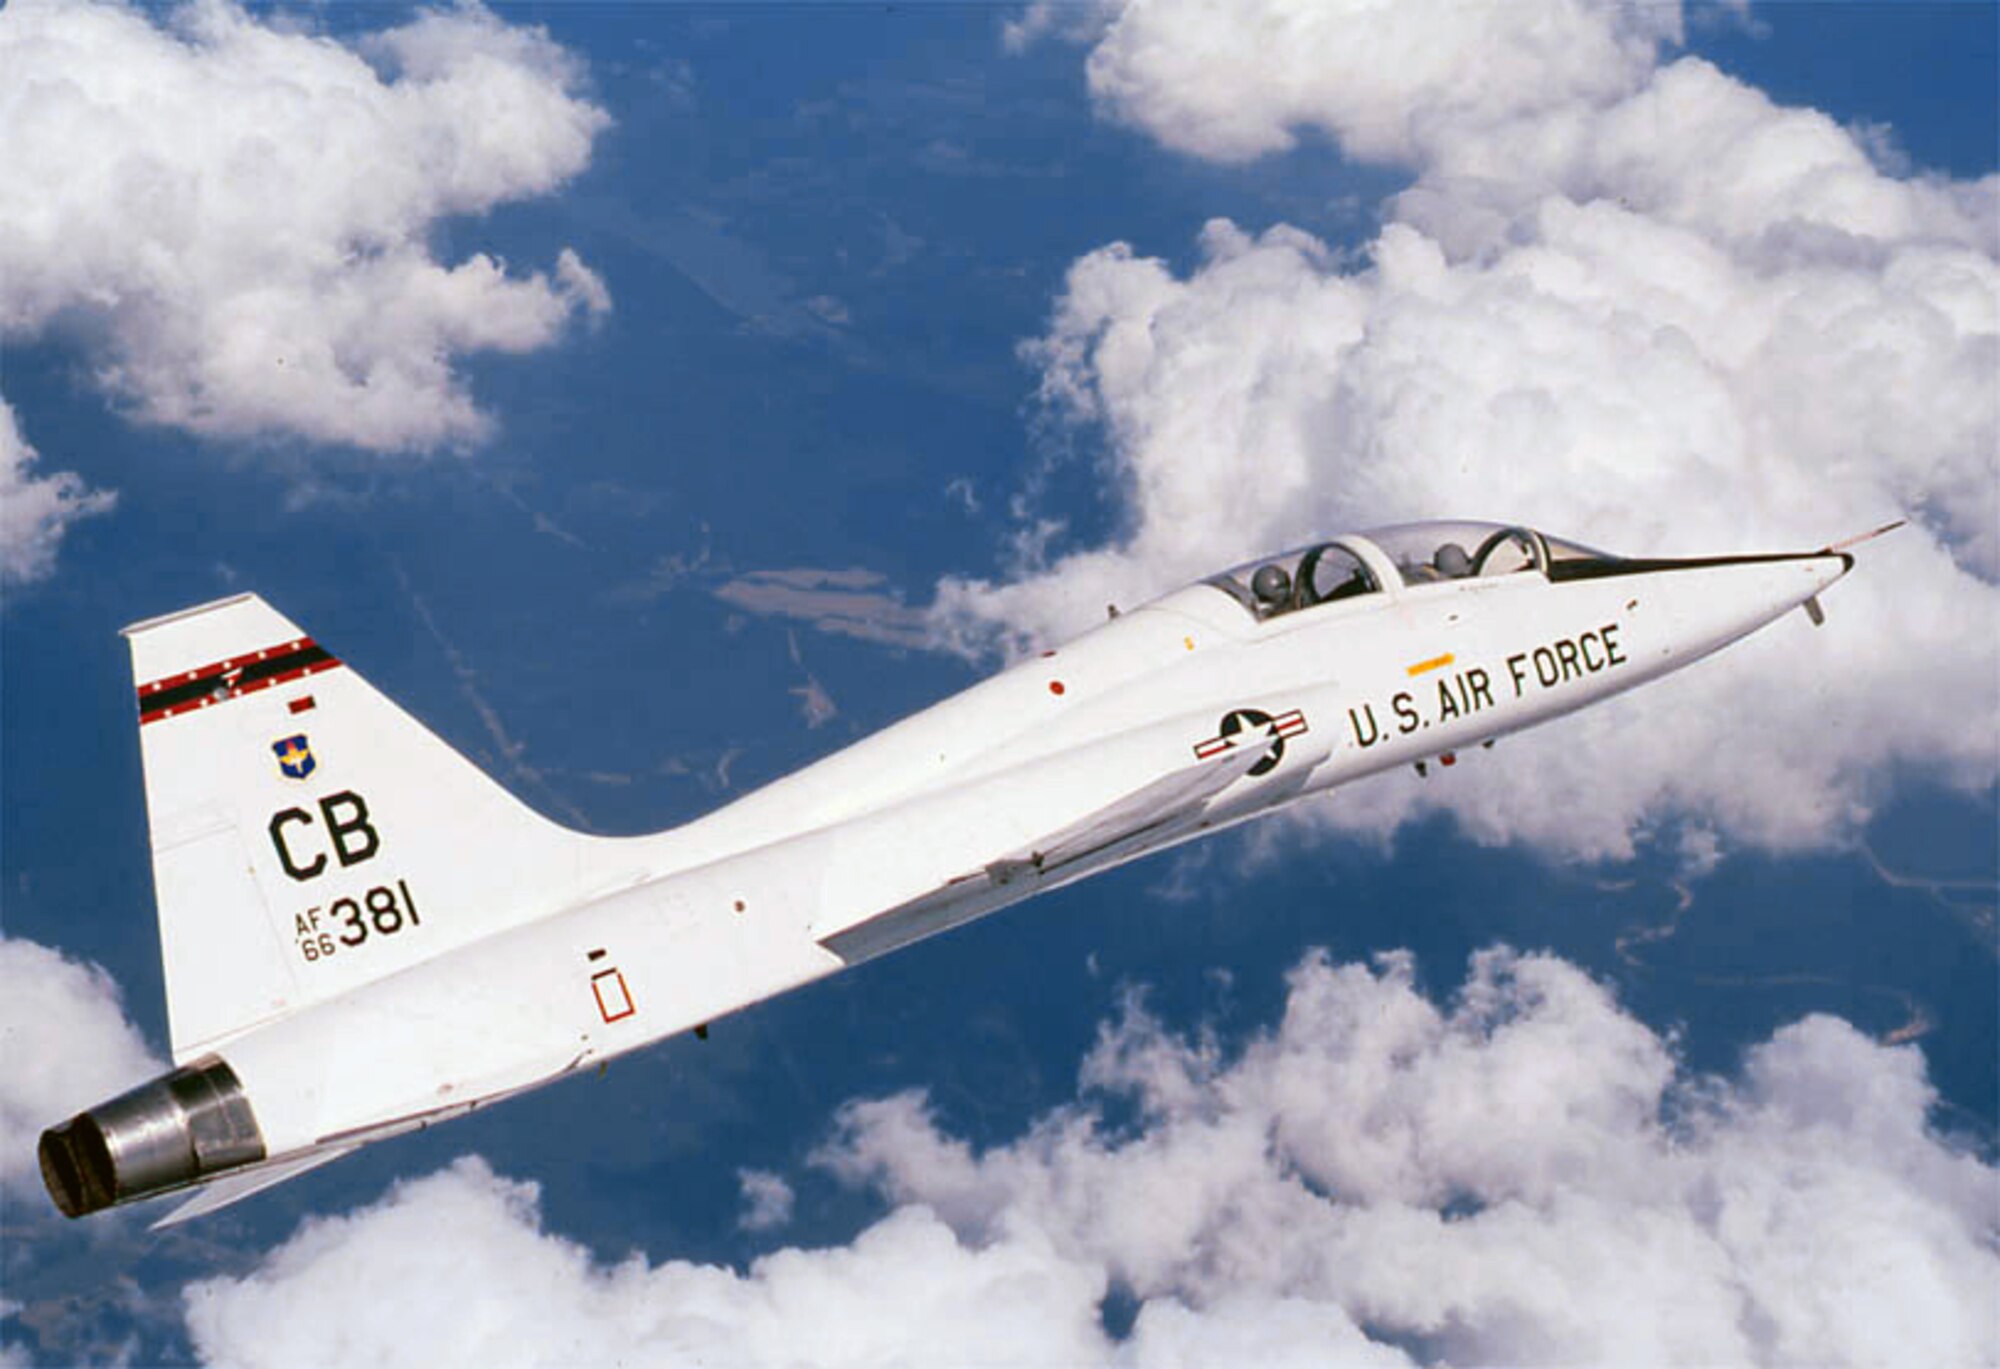 The T-38 Talon is a twin-engine, high-altitude, supersonic jet trainer used in a variety of roles because of its design, economy of operations, ease of maintenance, high performance and exceptional safety record. It is used primarily by Air Education and Training Command for undergraduate pilot and pilot instructor training. Air Combat Command, Air Mobility Command and the National Aeronautics and Space Administration also use the T-38 in various roles. (U.S. Air Force photo/Staff Sgt. Steve Thurow) 